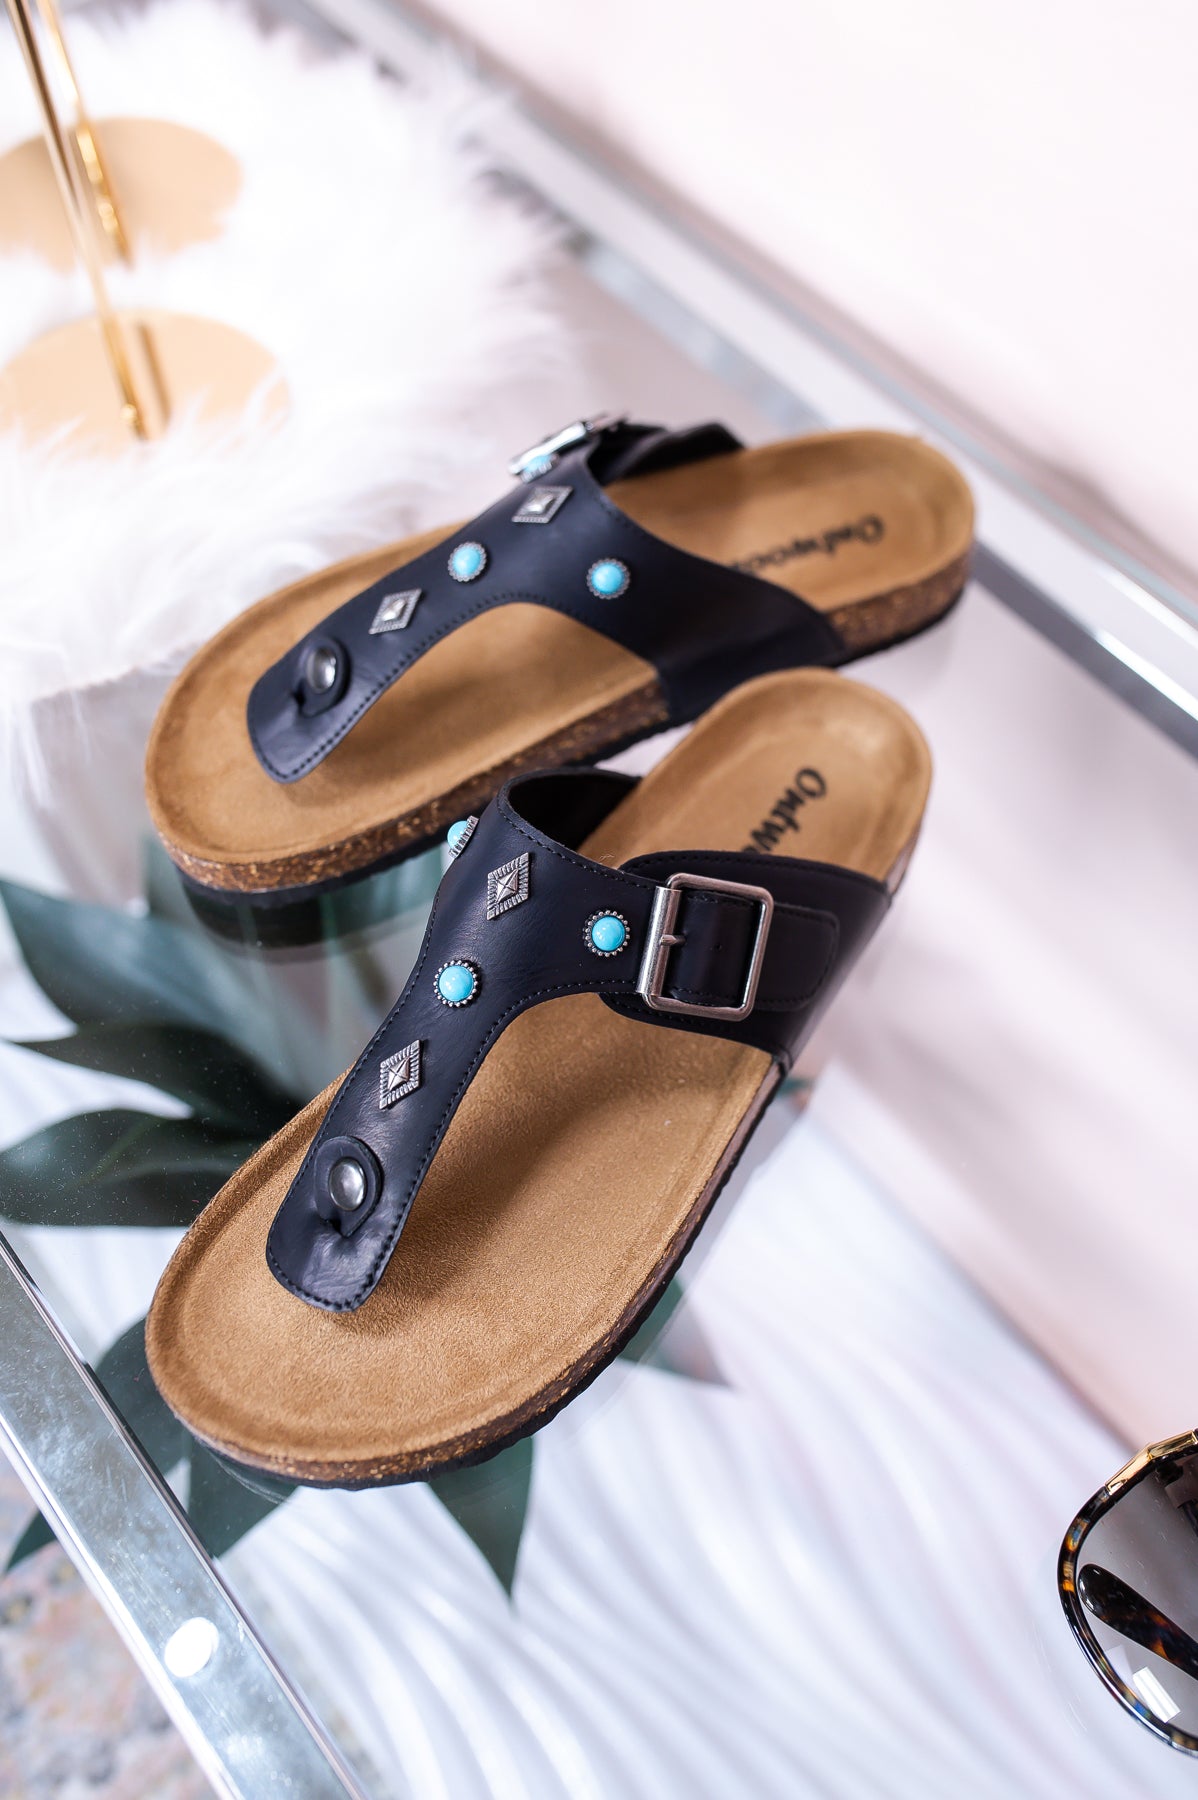 Silhouette Sandals - OBSOLETES DO NOT TOUCH 1AAC8E